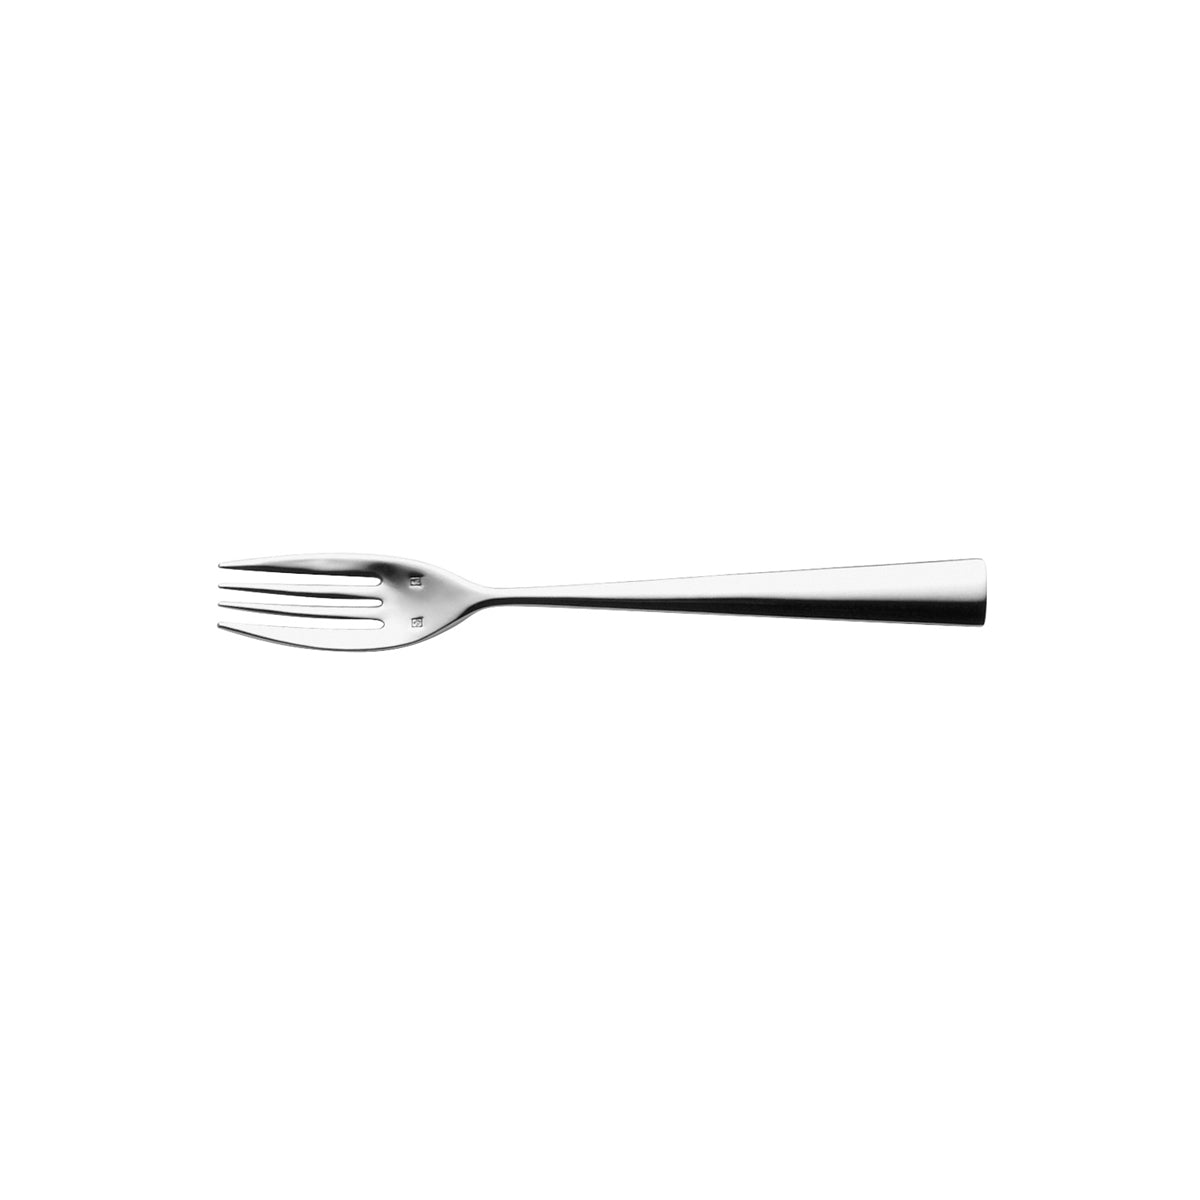 01.0053.1020 Hepp Accent Table Fork Tomkin Australia Hospitality Supplies